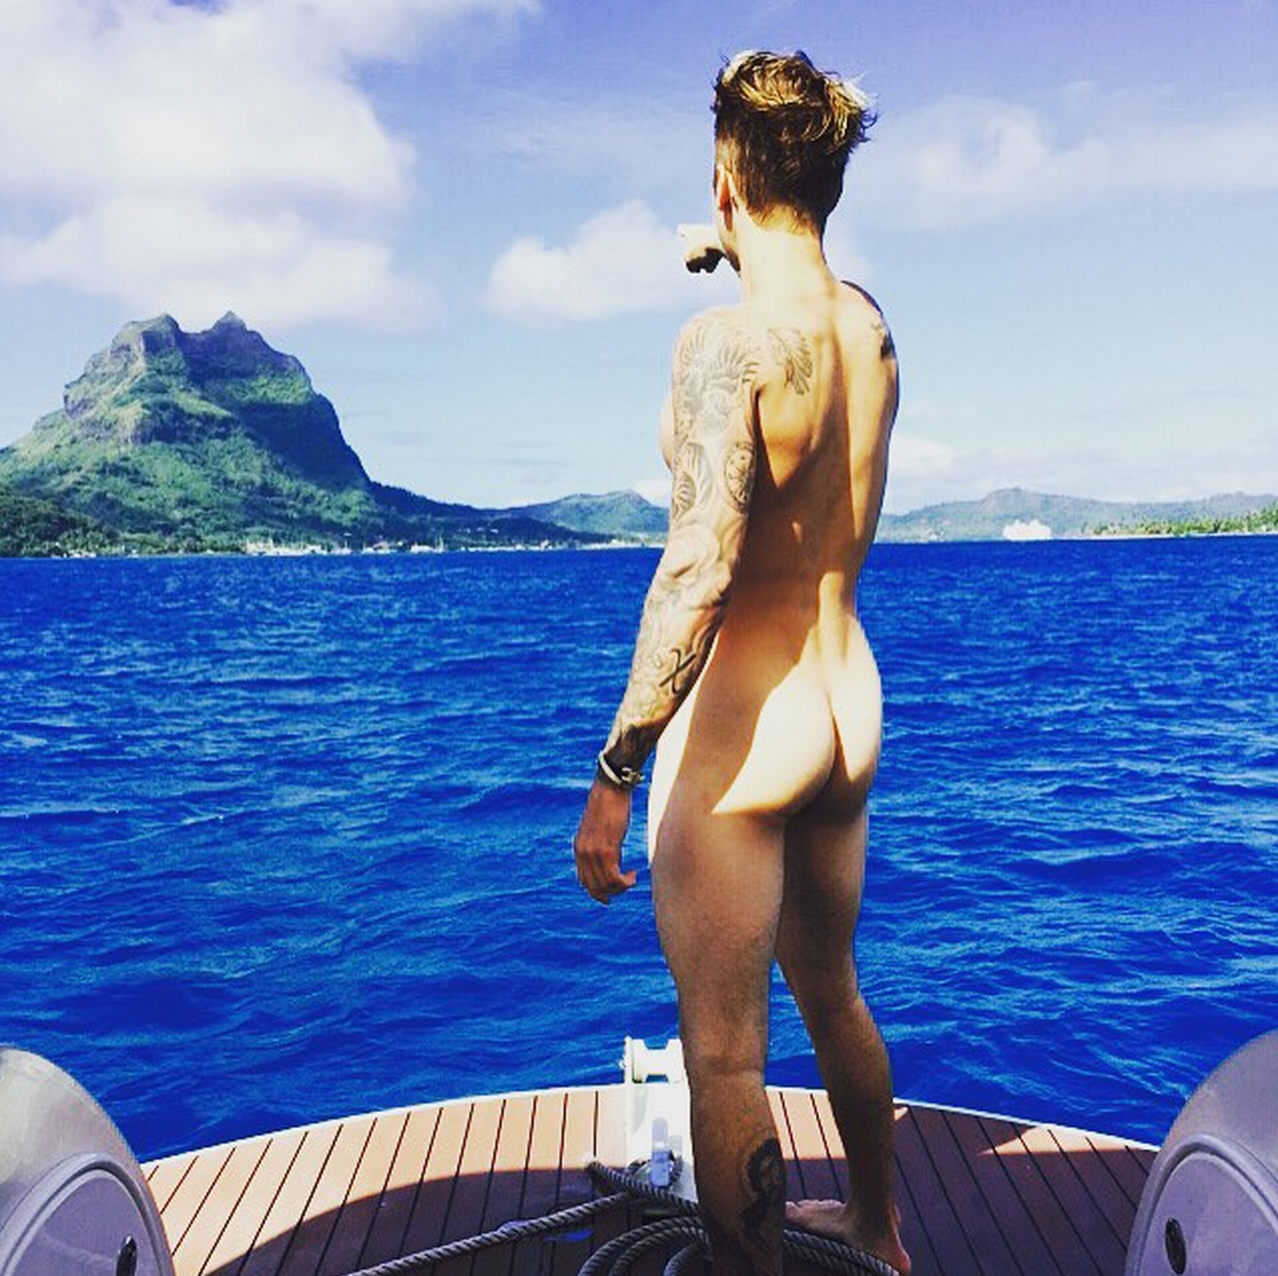 Full Justin Bieber Porn - Today is the day Justin Bieber got fully naked on Instagram